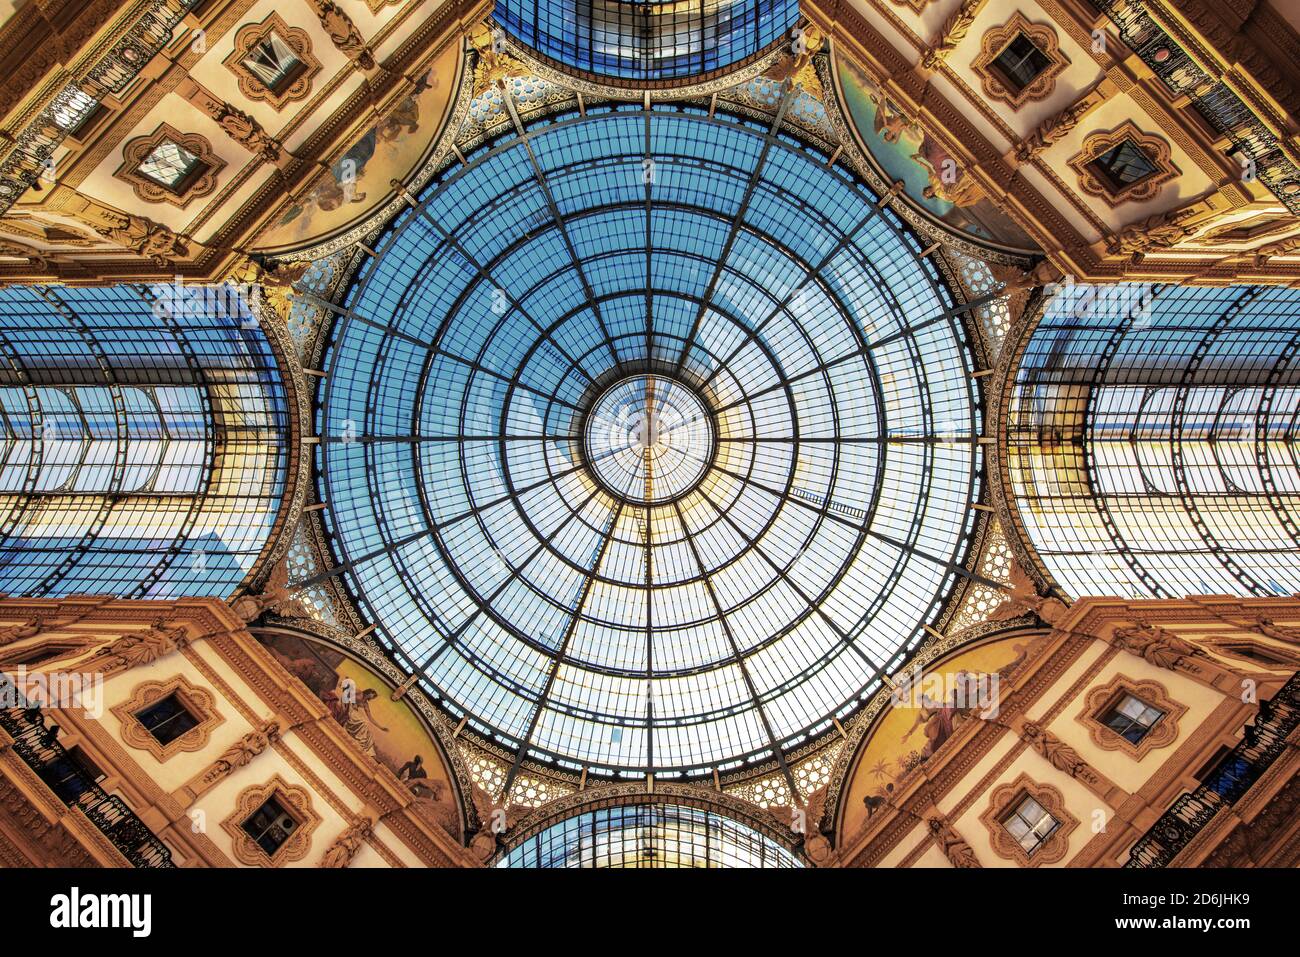 The glass dome of Galleria Vittorio Emanuele II, in central Milan, Italy Stock Photo